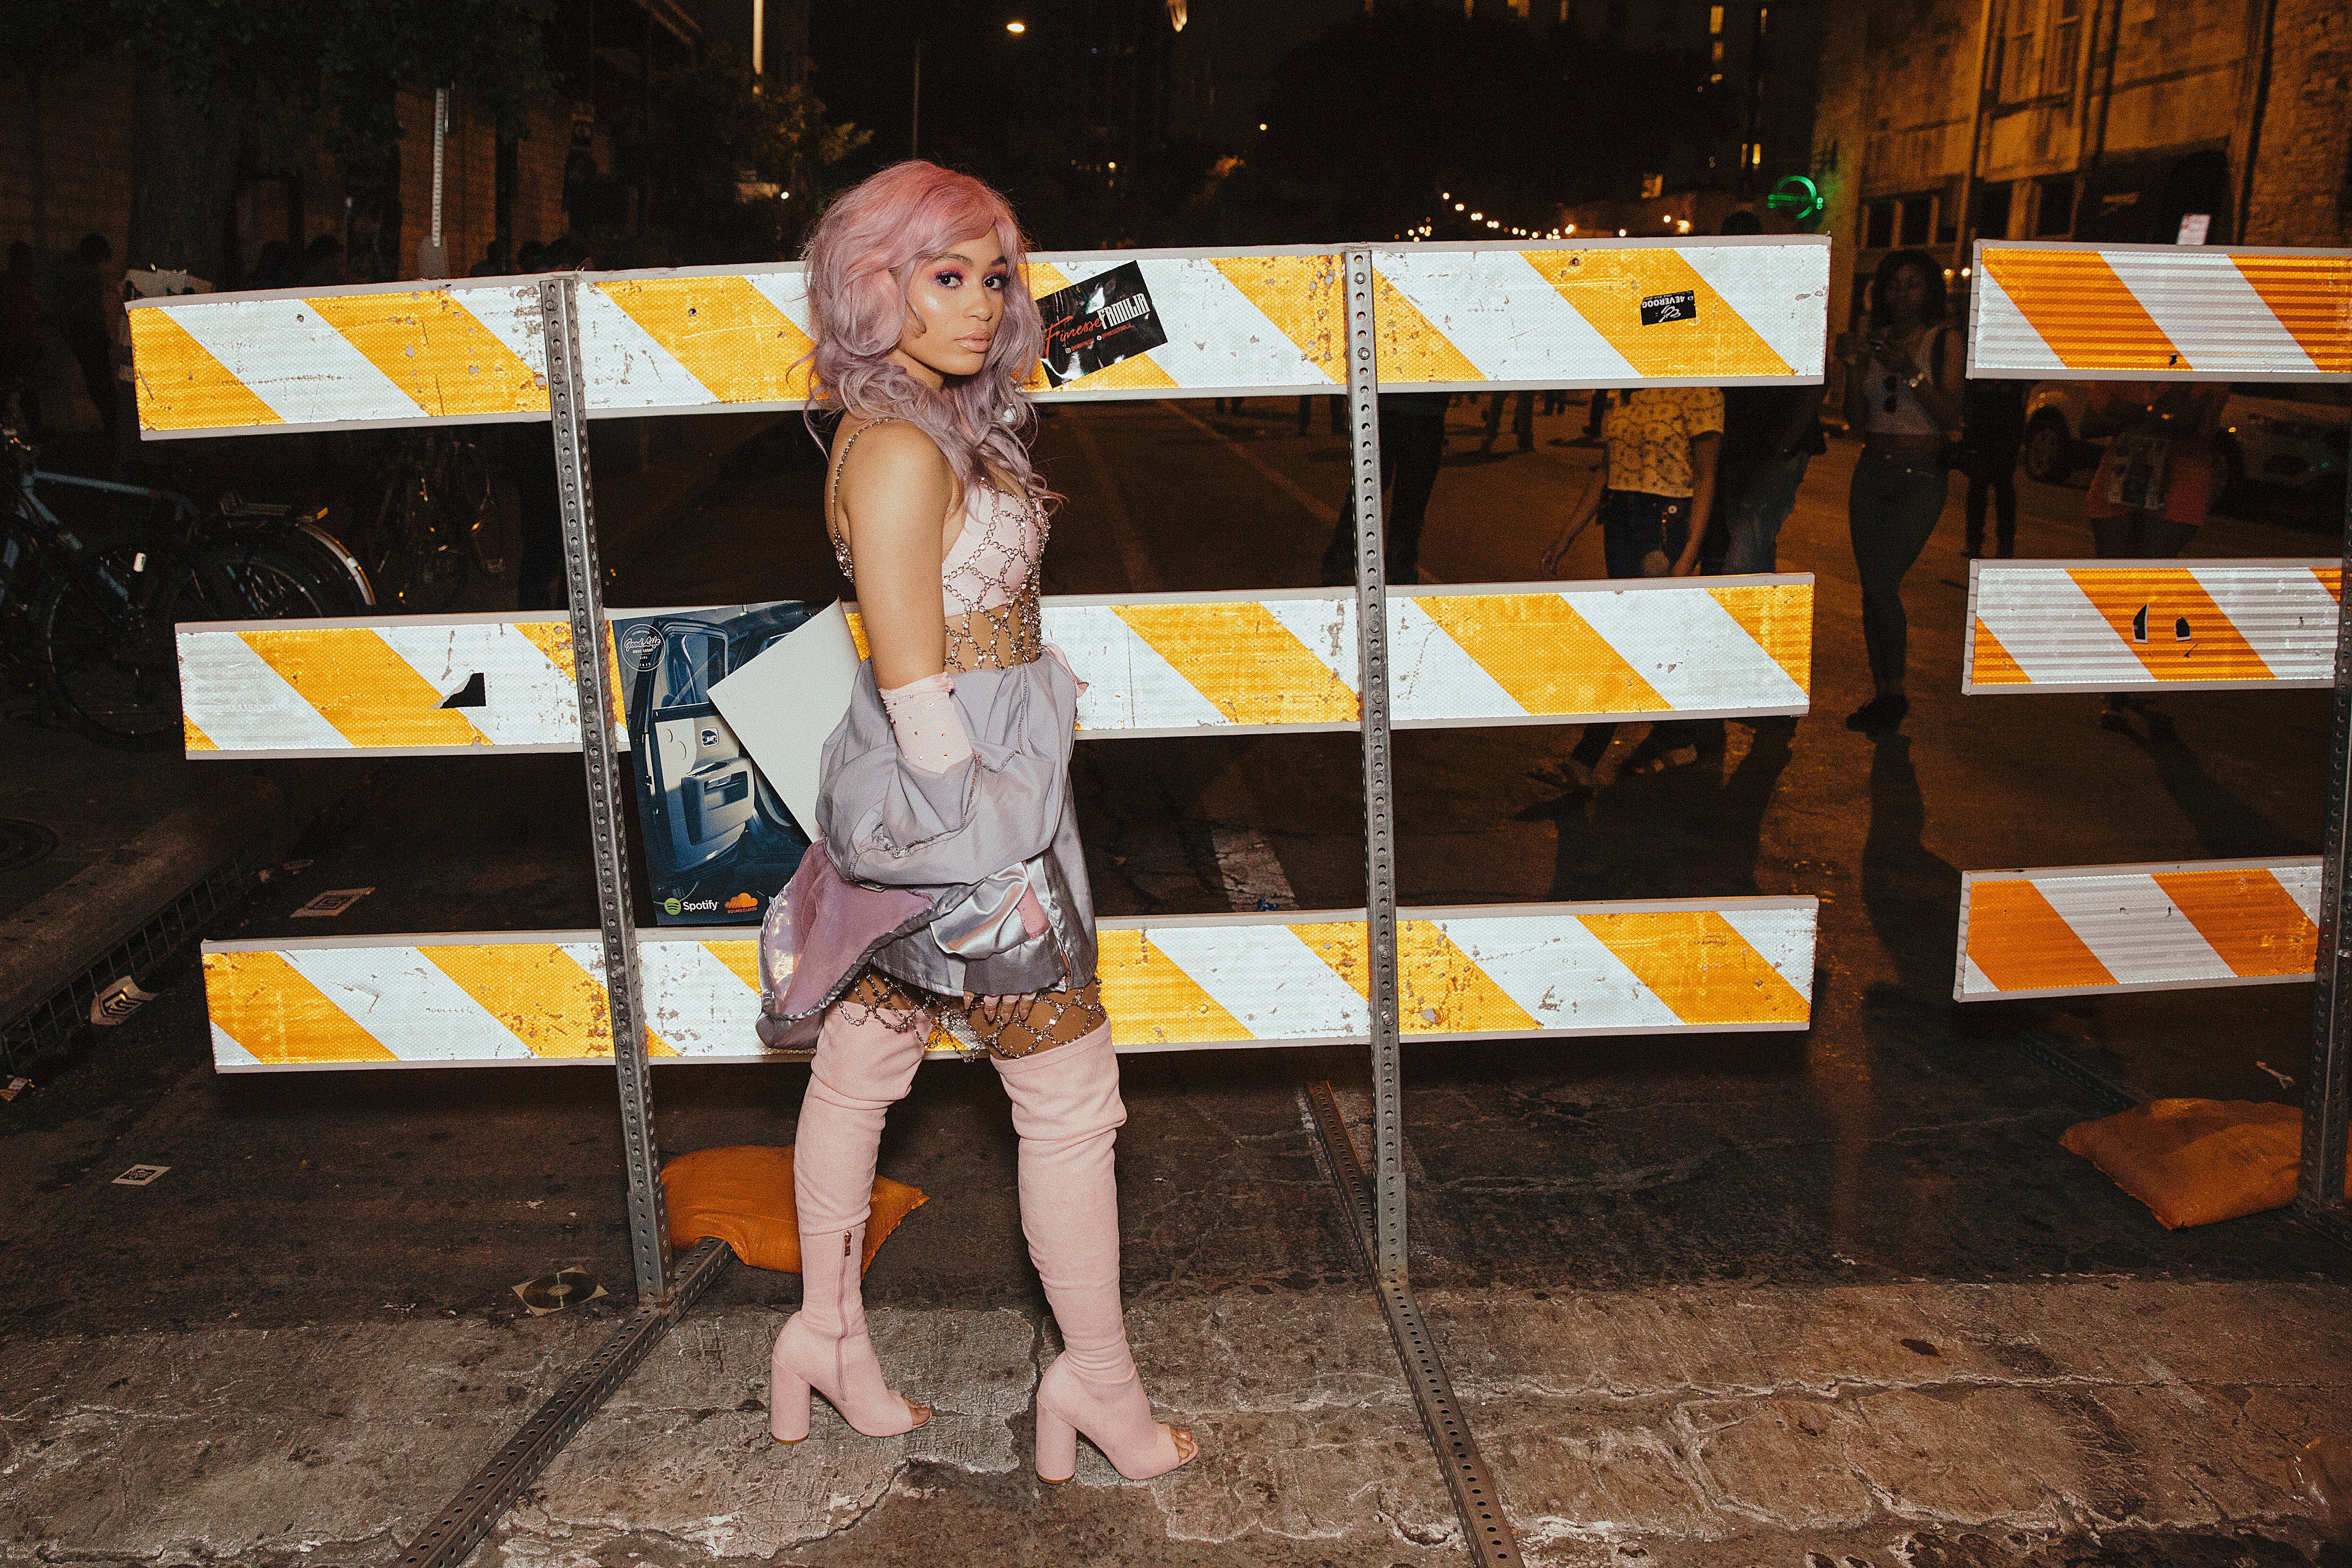 Cool Girls Dominated the Street Style Scene at SXSW
